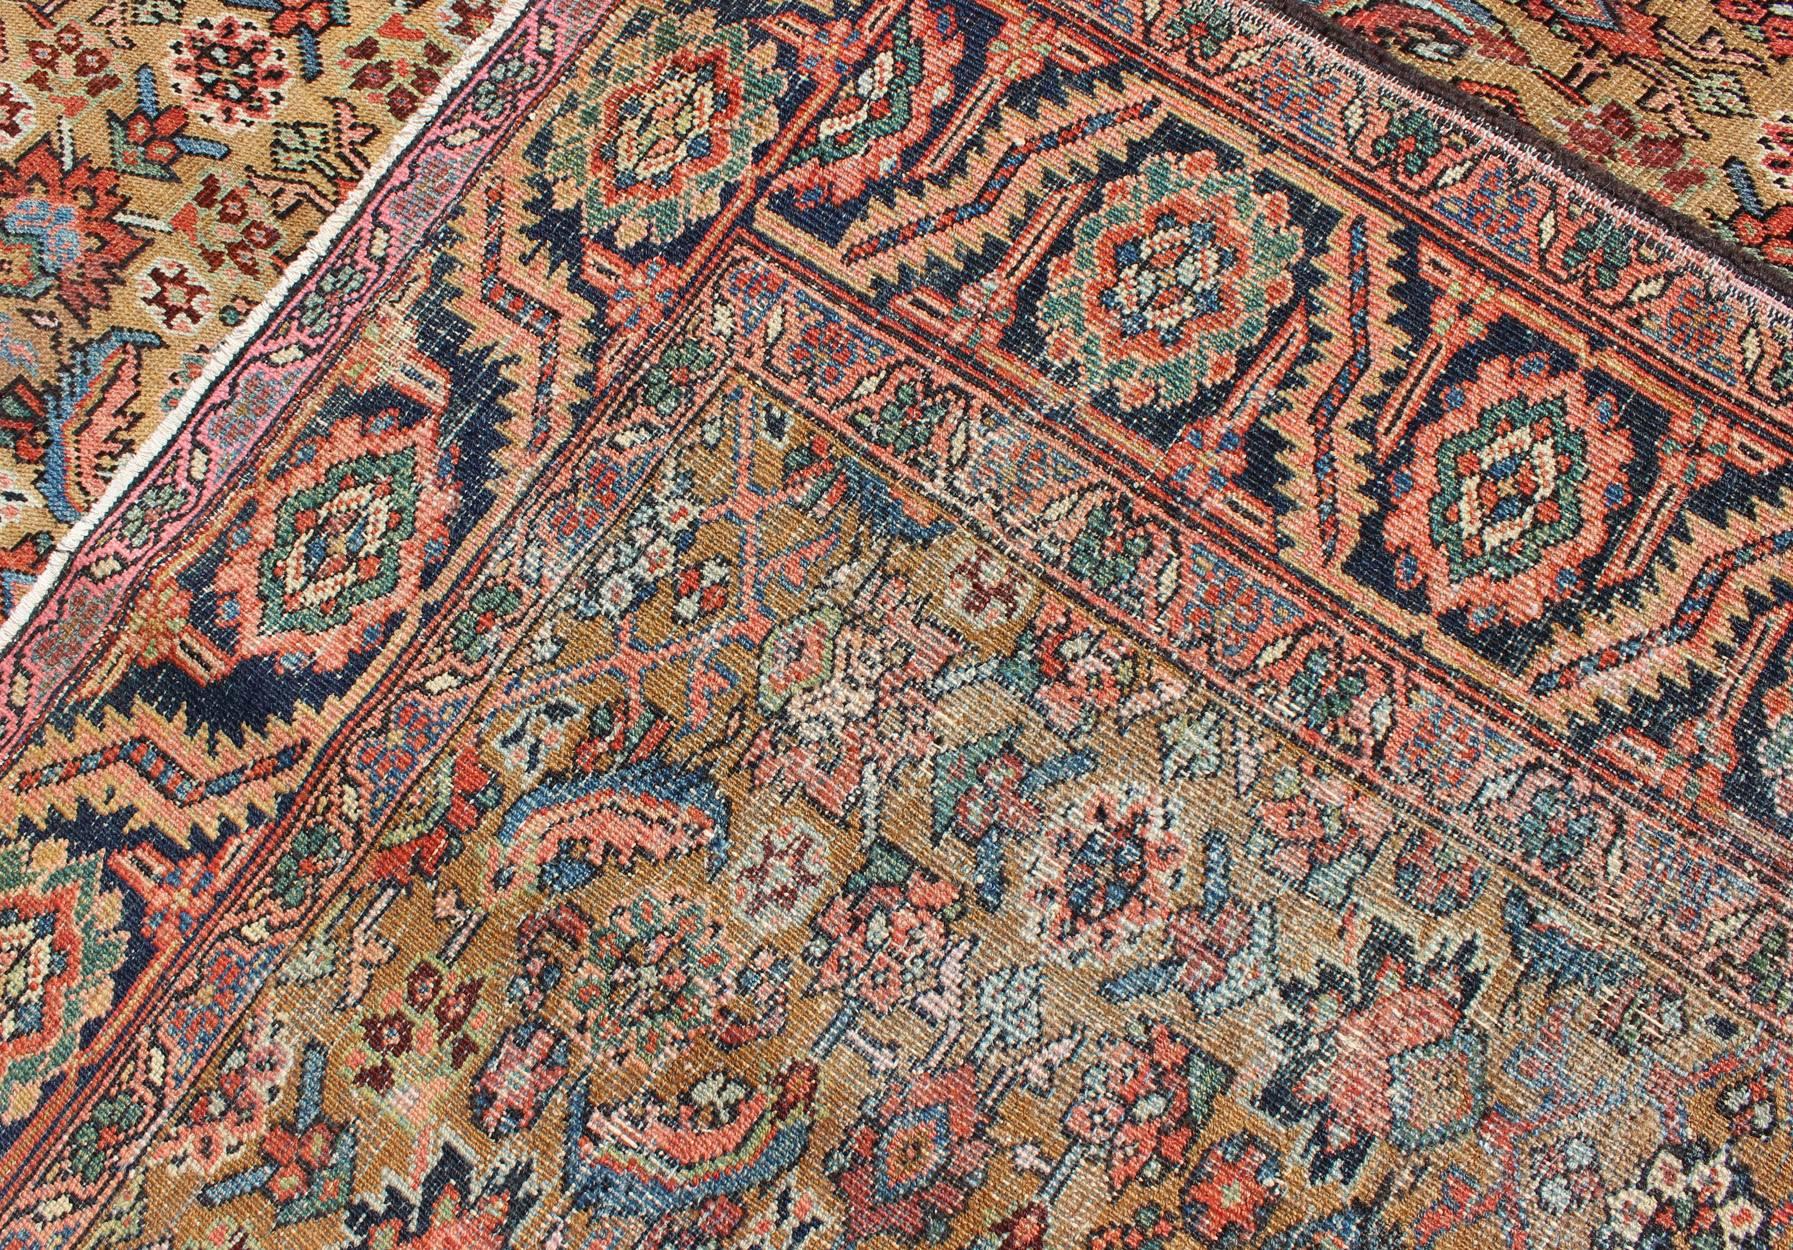 Wool Antique Persian Bakhshaish Carpet with All Over Herati Design in Gold and Blue